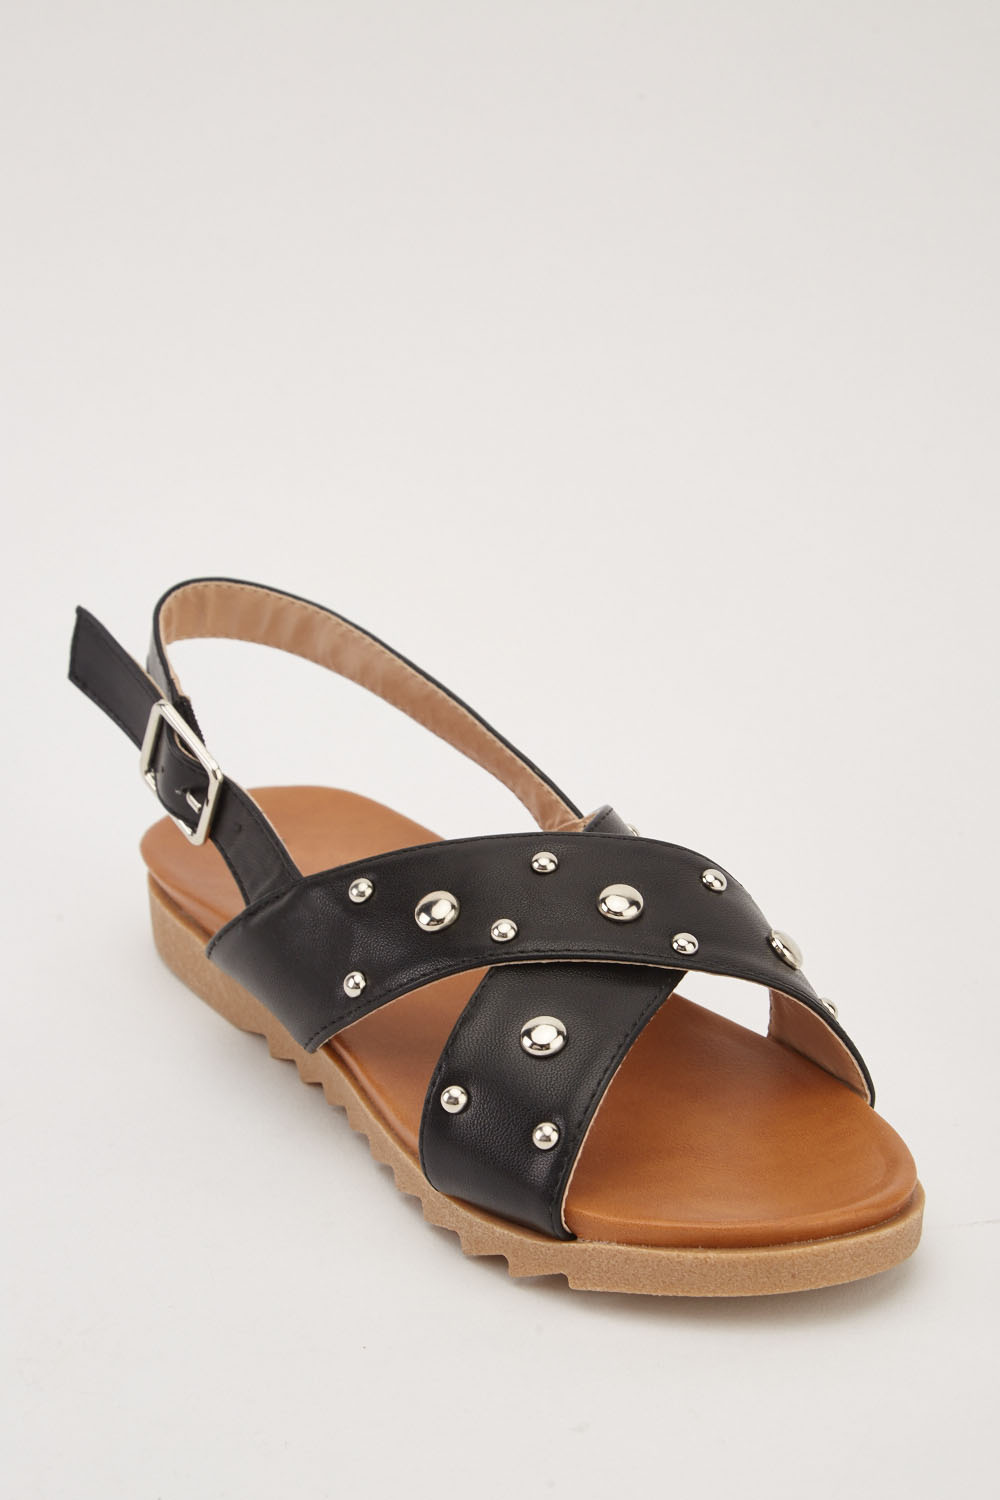 Studded Cross Strap Sandals  Just 6